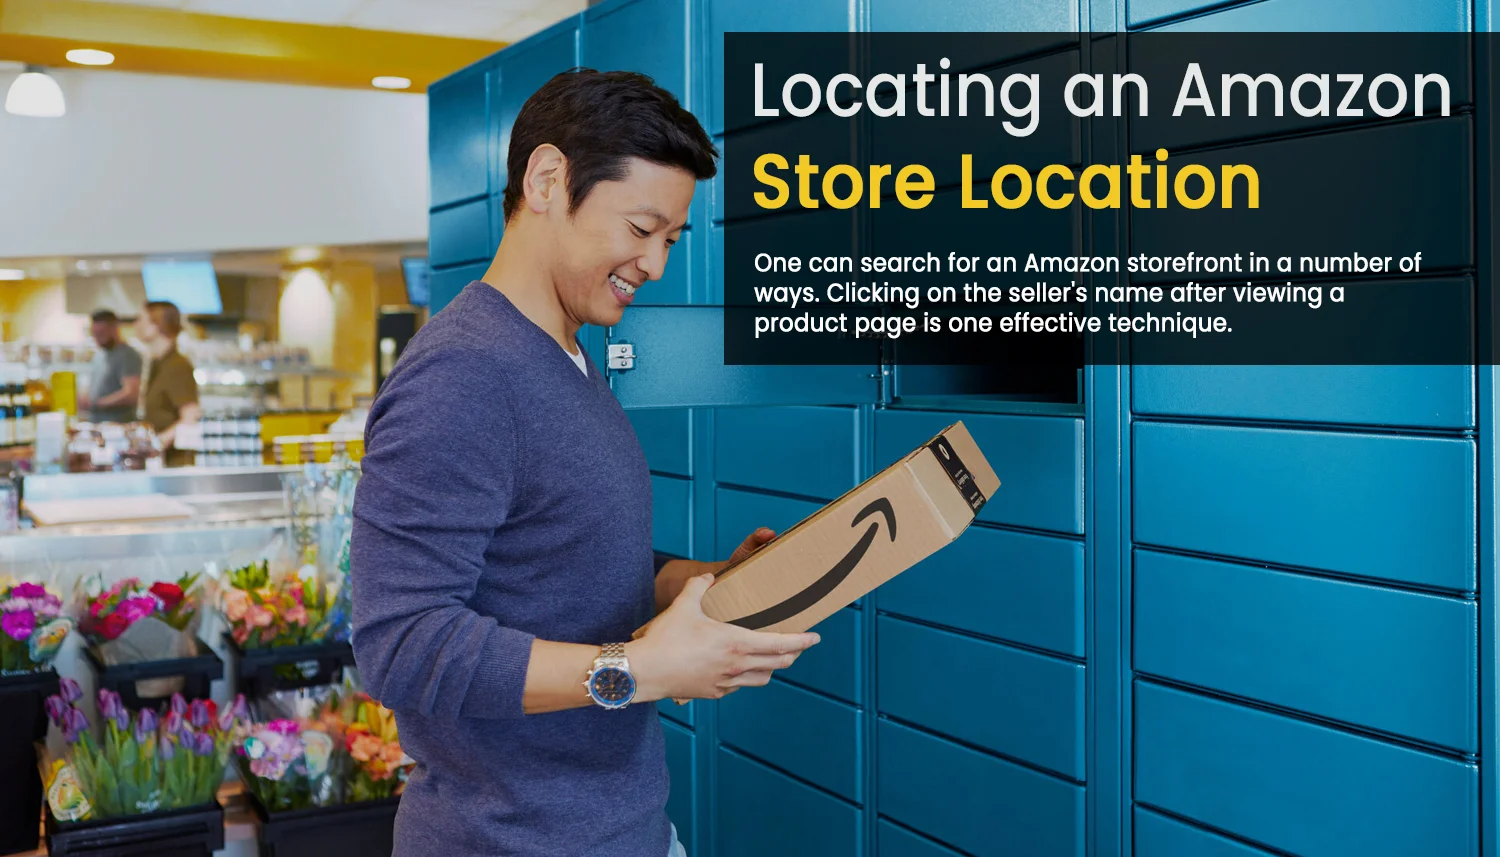 Locating an Amazon Store Location